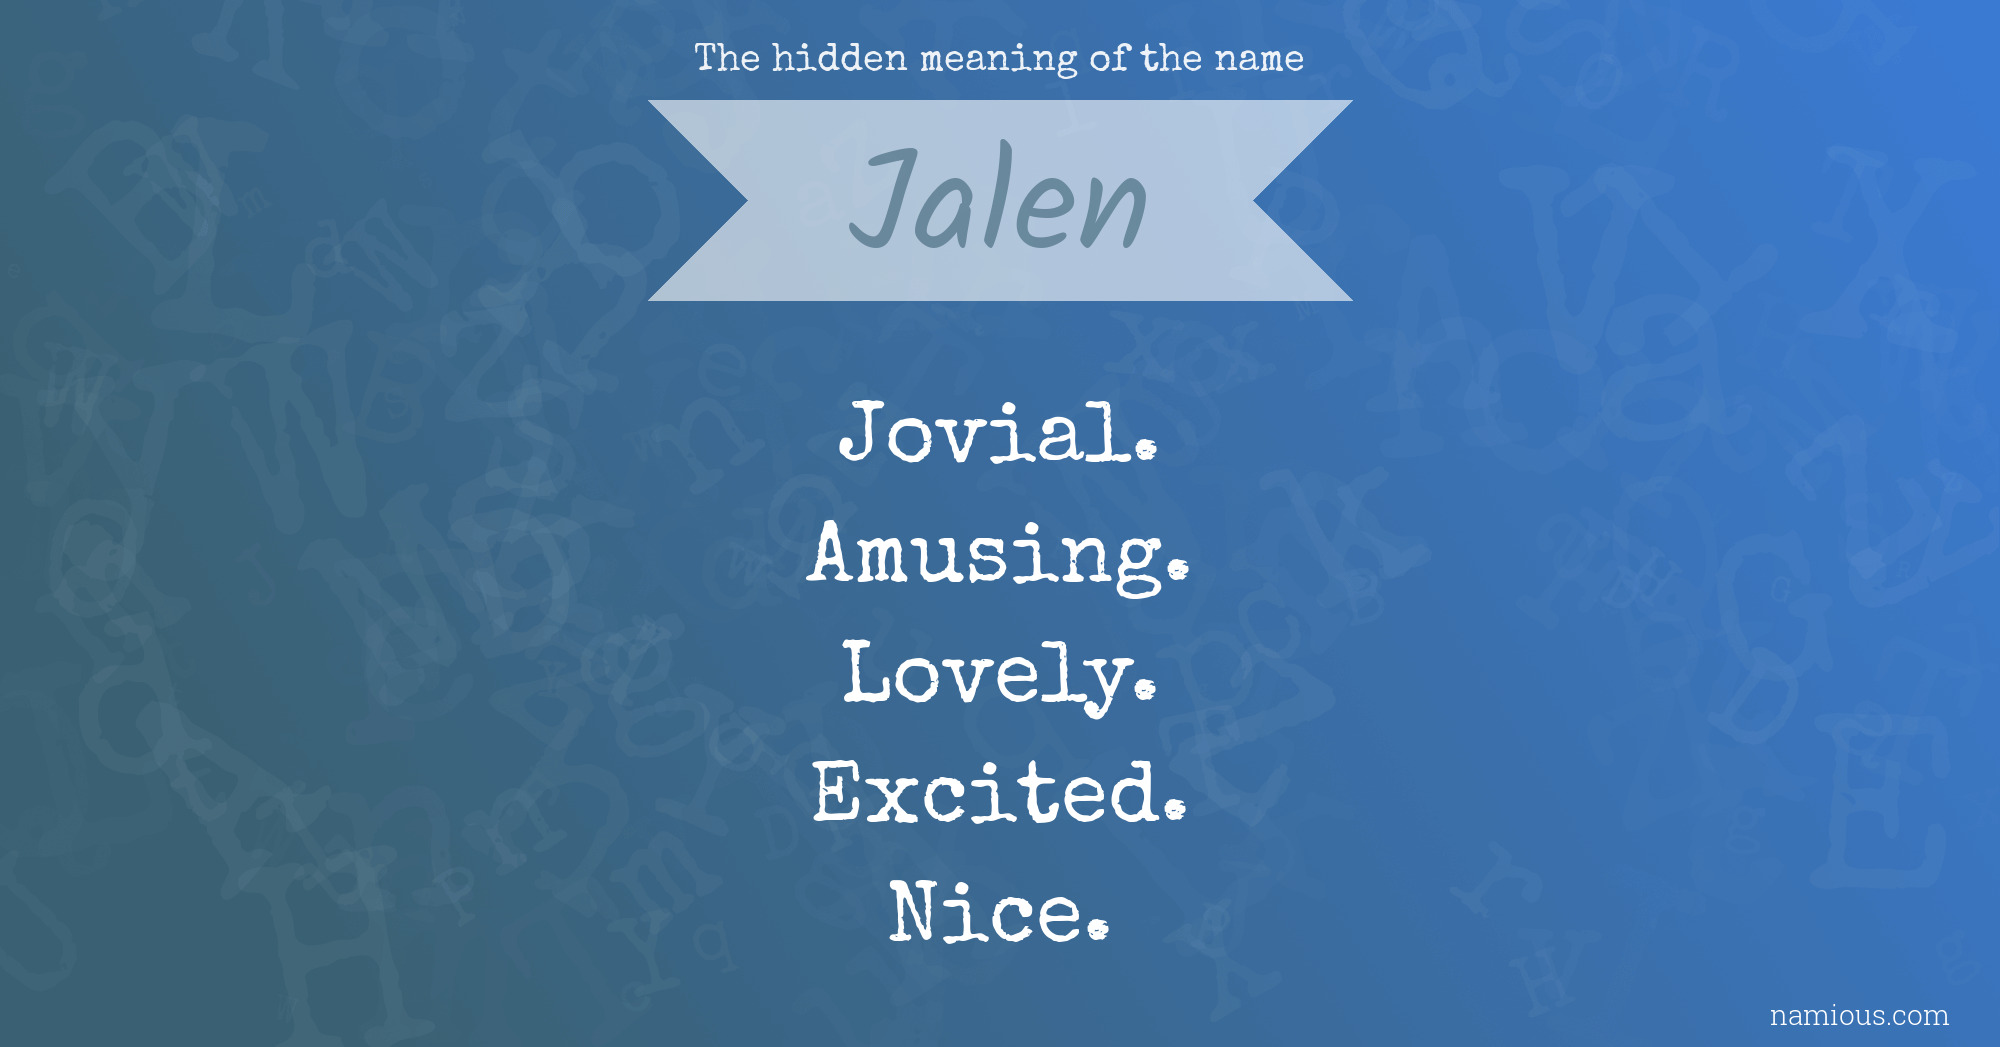 The hidden meaning of the name Jalen